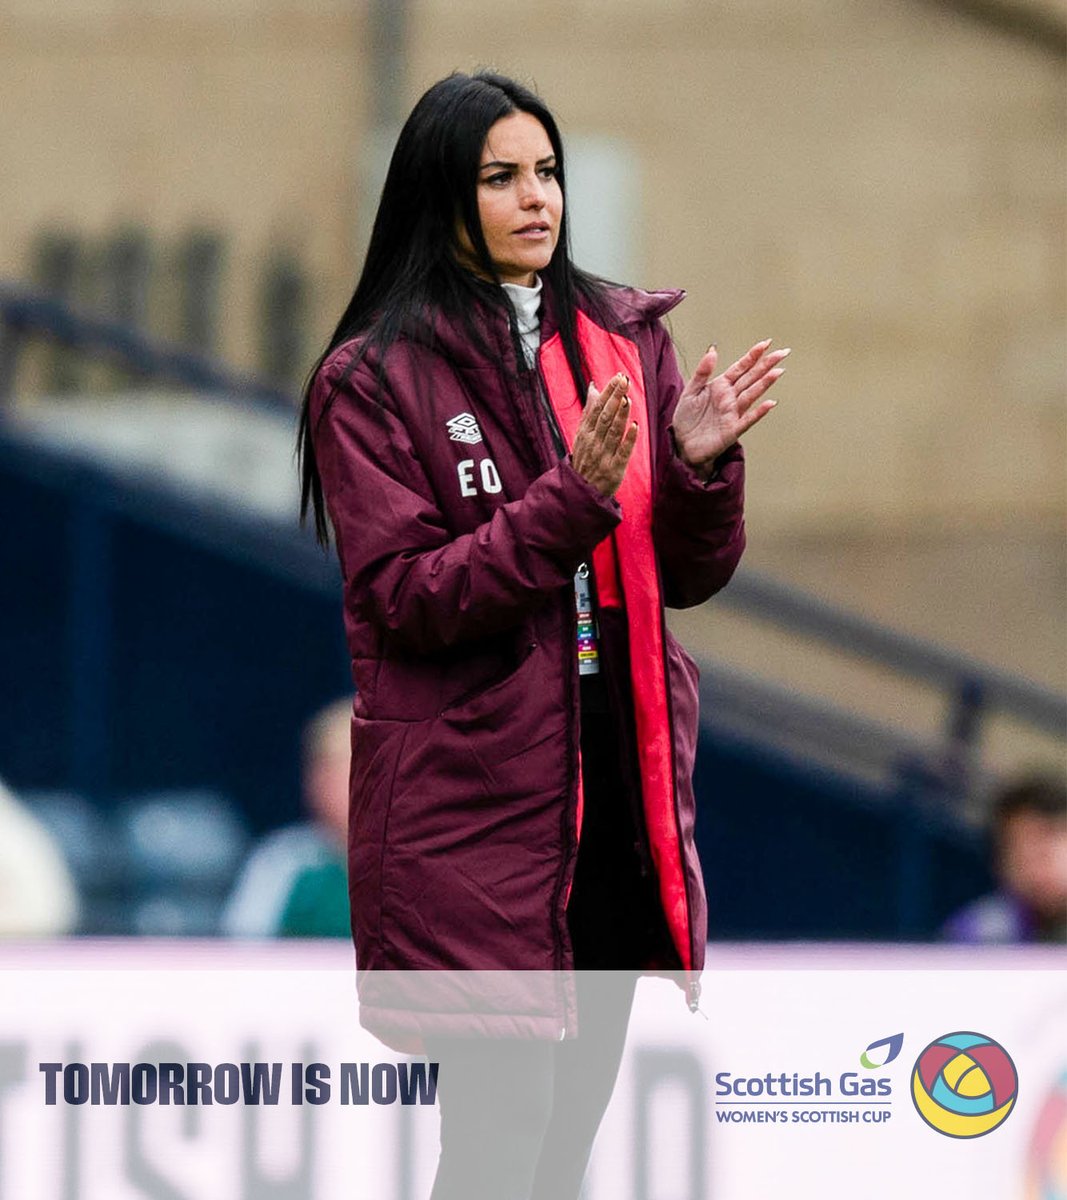 Your @scottishgas Women's Scottish Cup head coaches 🤝 @JoPotter8 and @Eva_Olid face off next Sunday. #ScottishCup